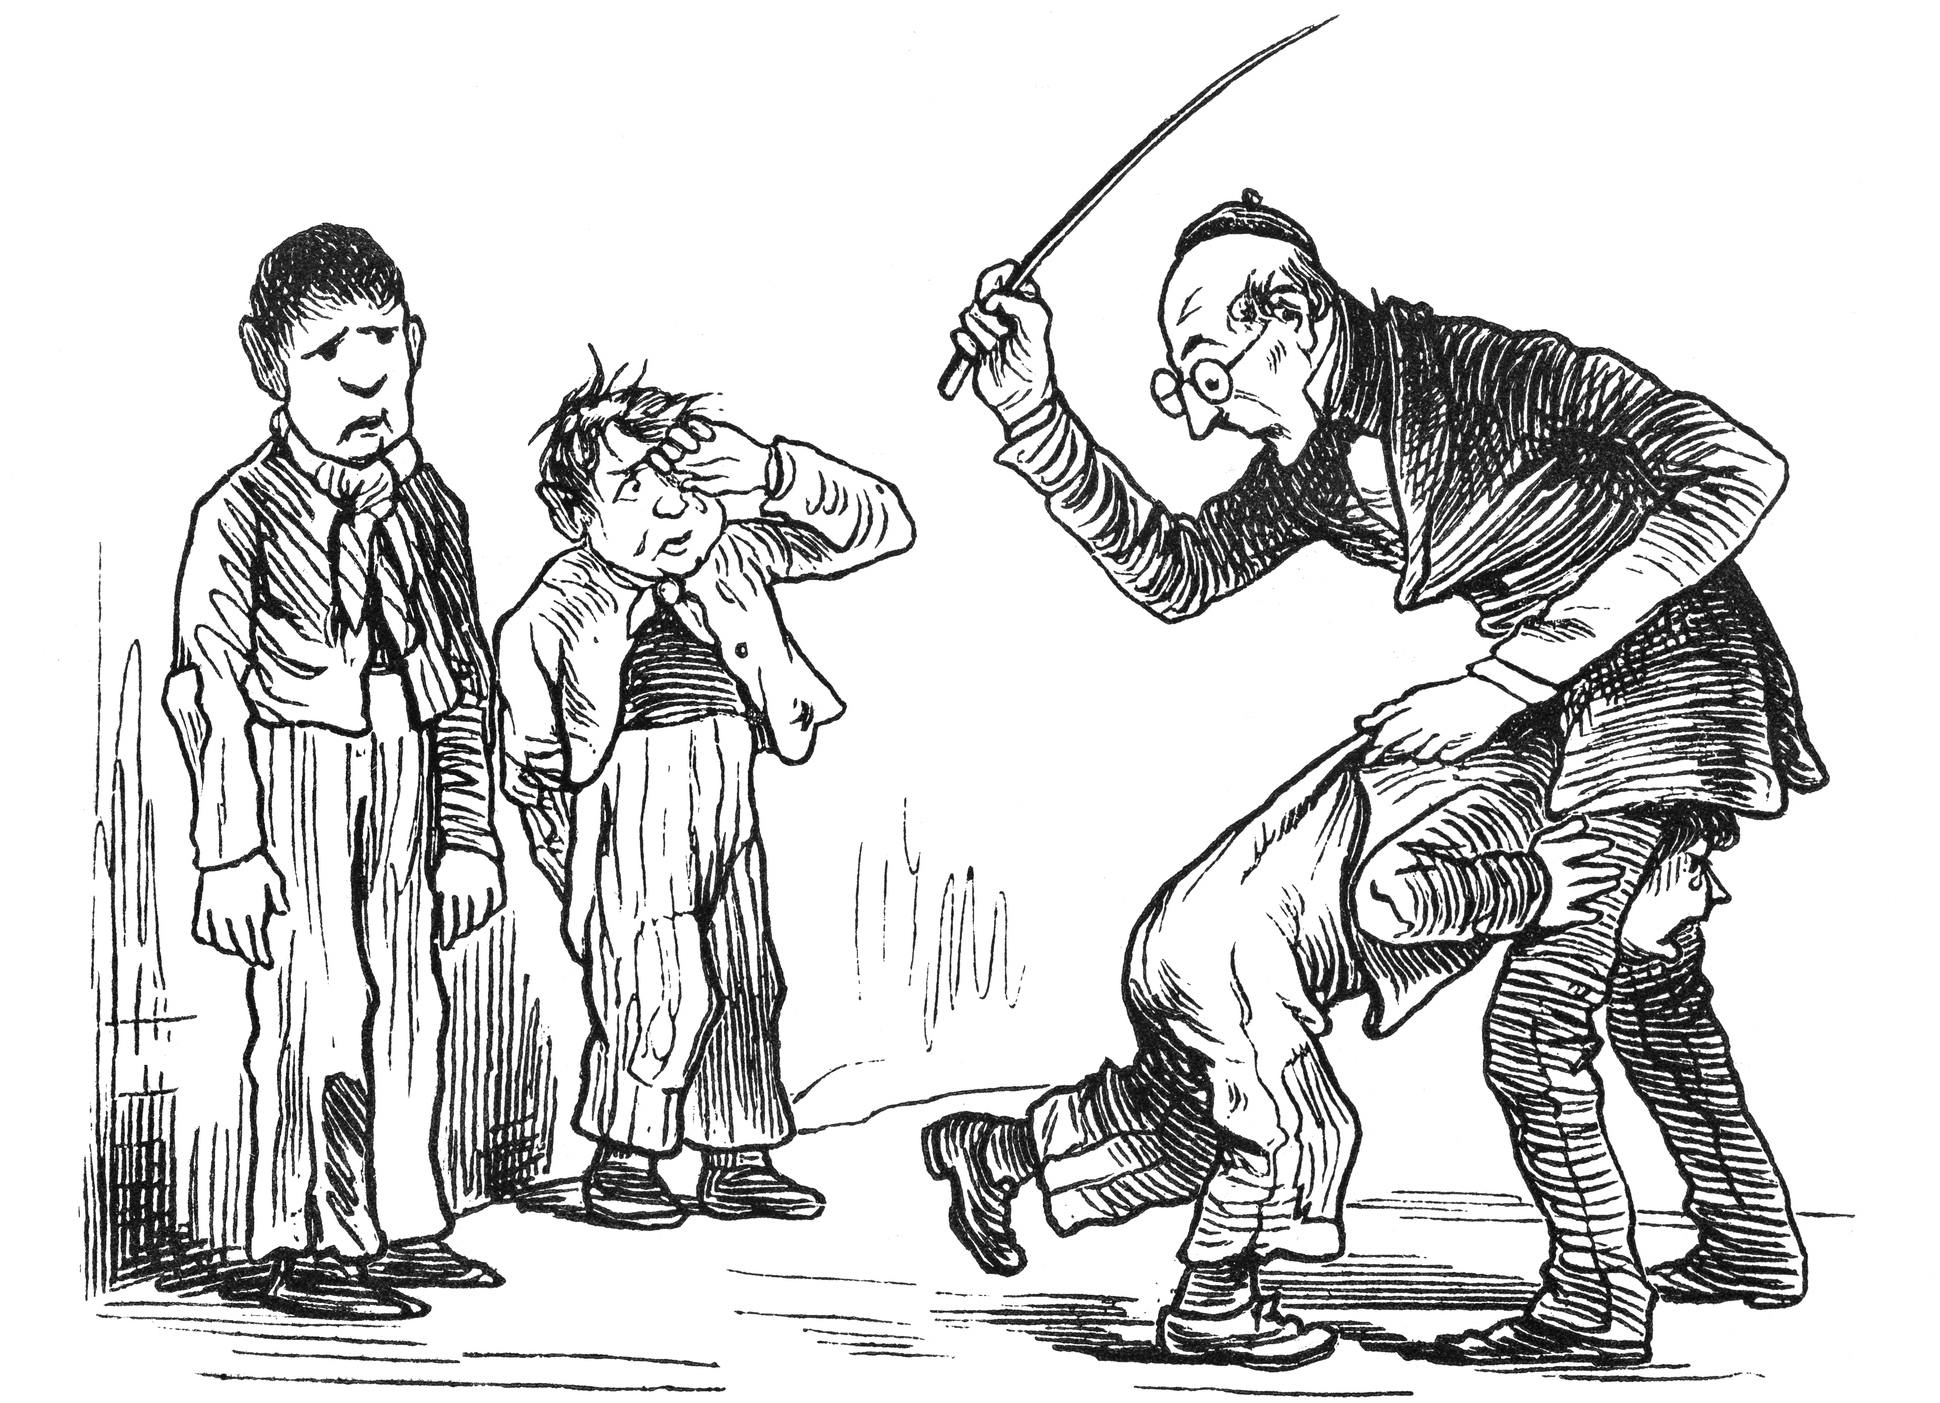 When I was a kid, corporal punishment wasn't an 'issue,' but...